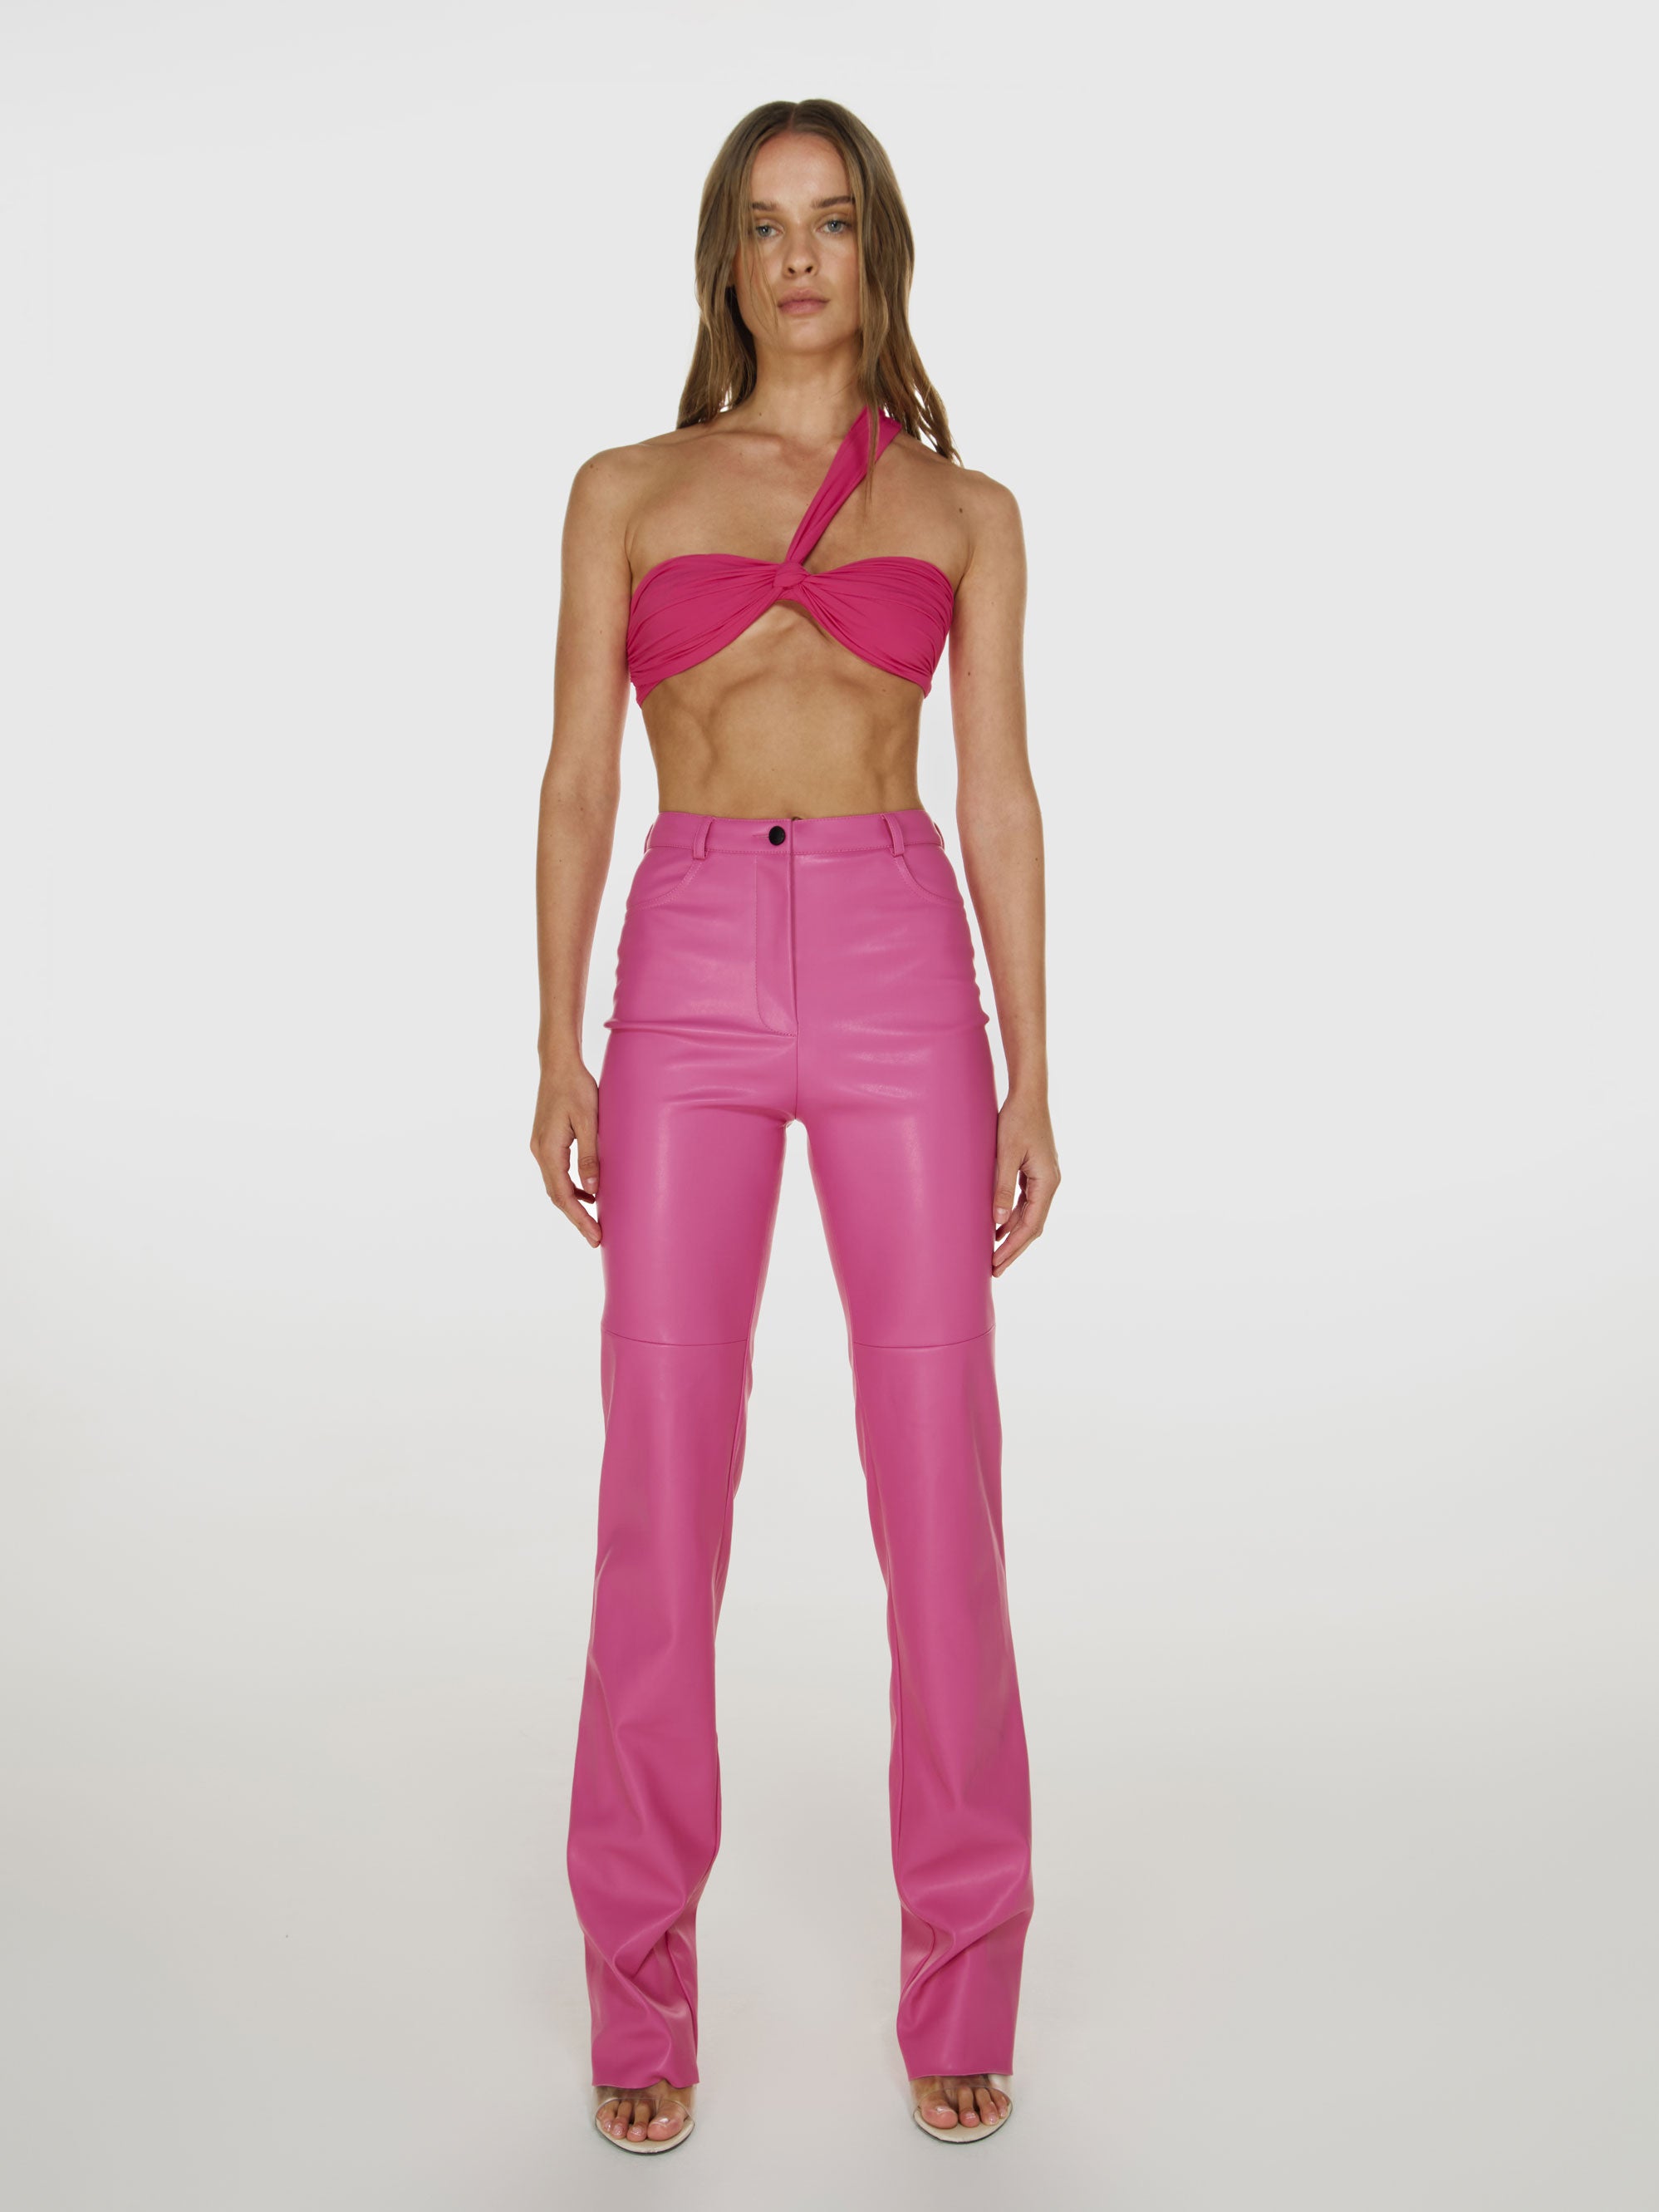 Full shot of a girl in a pink one shoulder crop top and pink vegan leather pants with straight leg